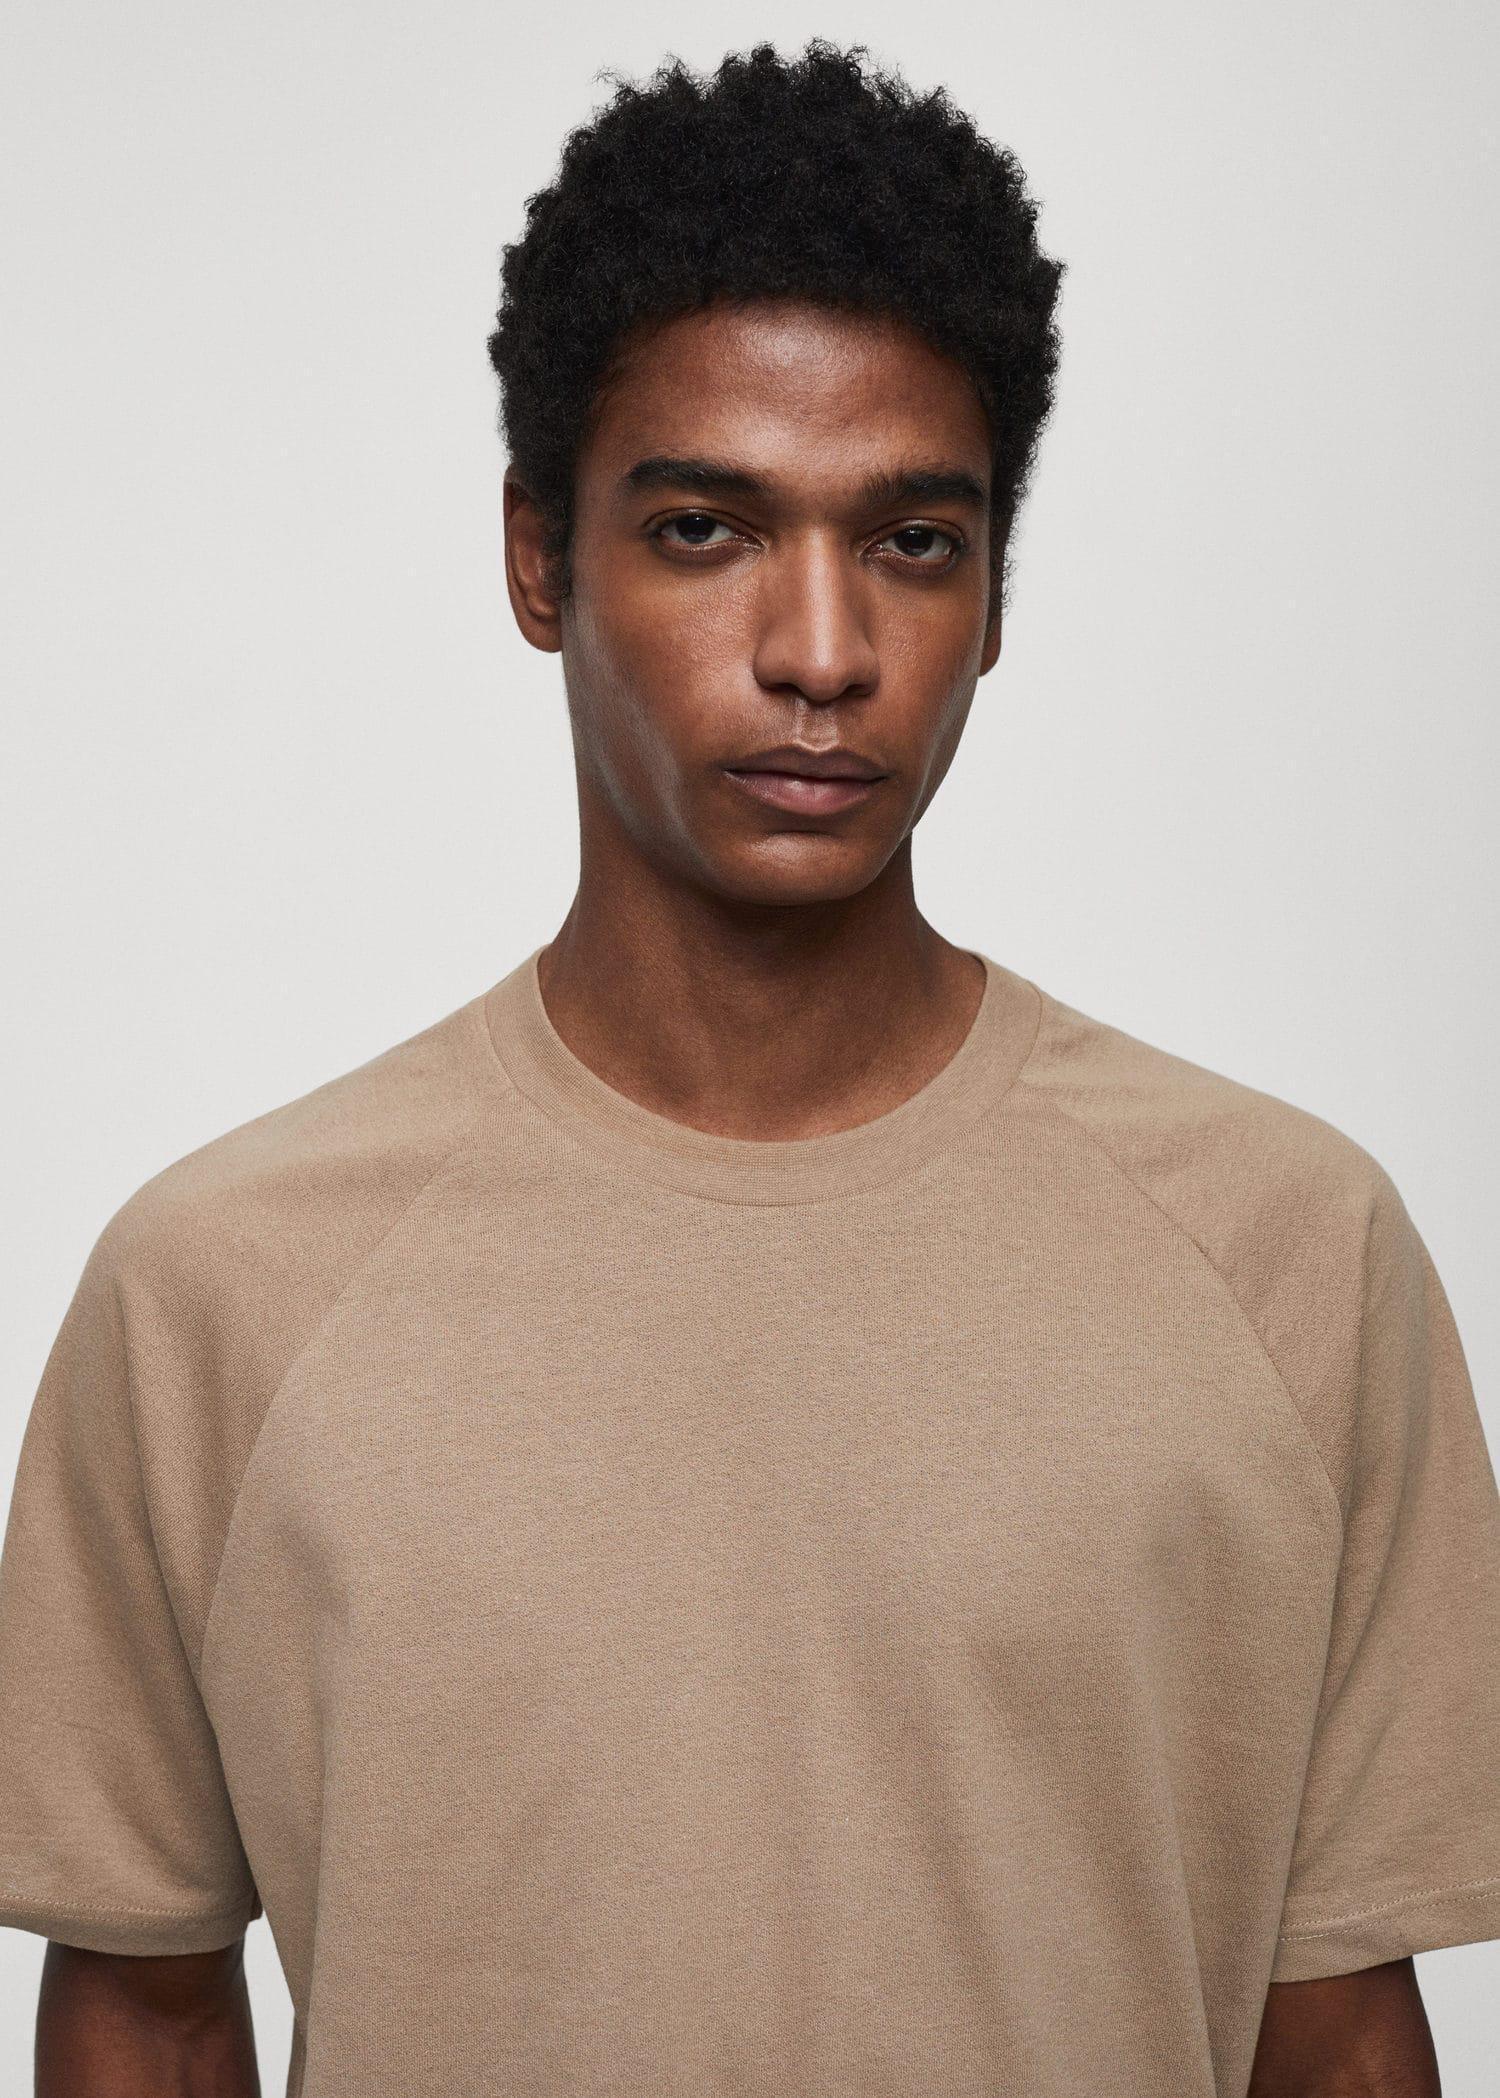 Mango - Beige Relaxed Fit Cotton T-Shirt